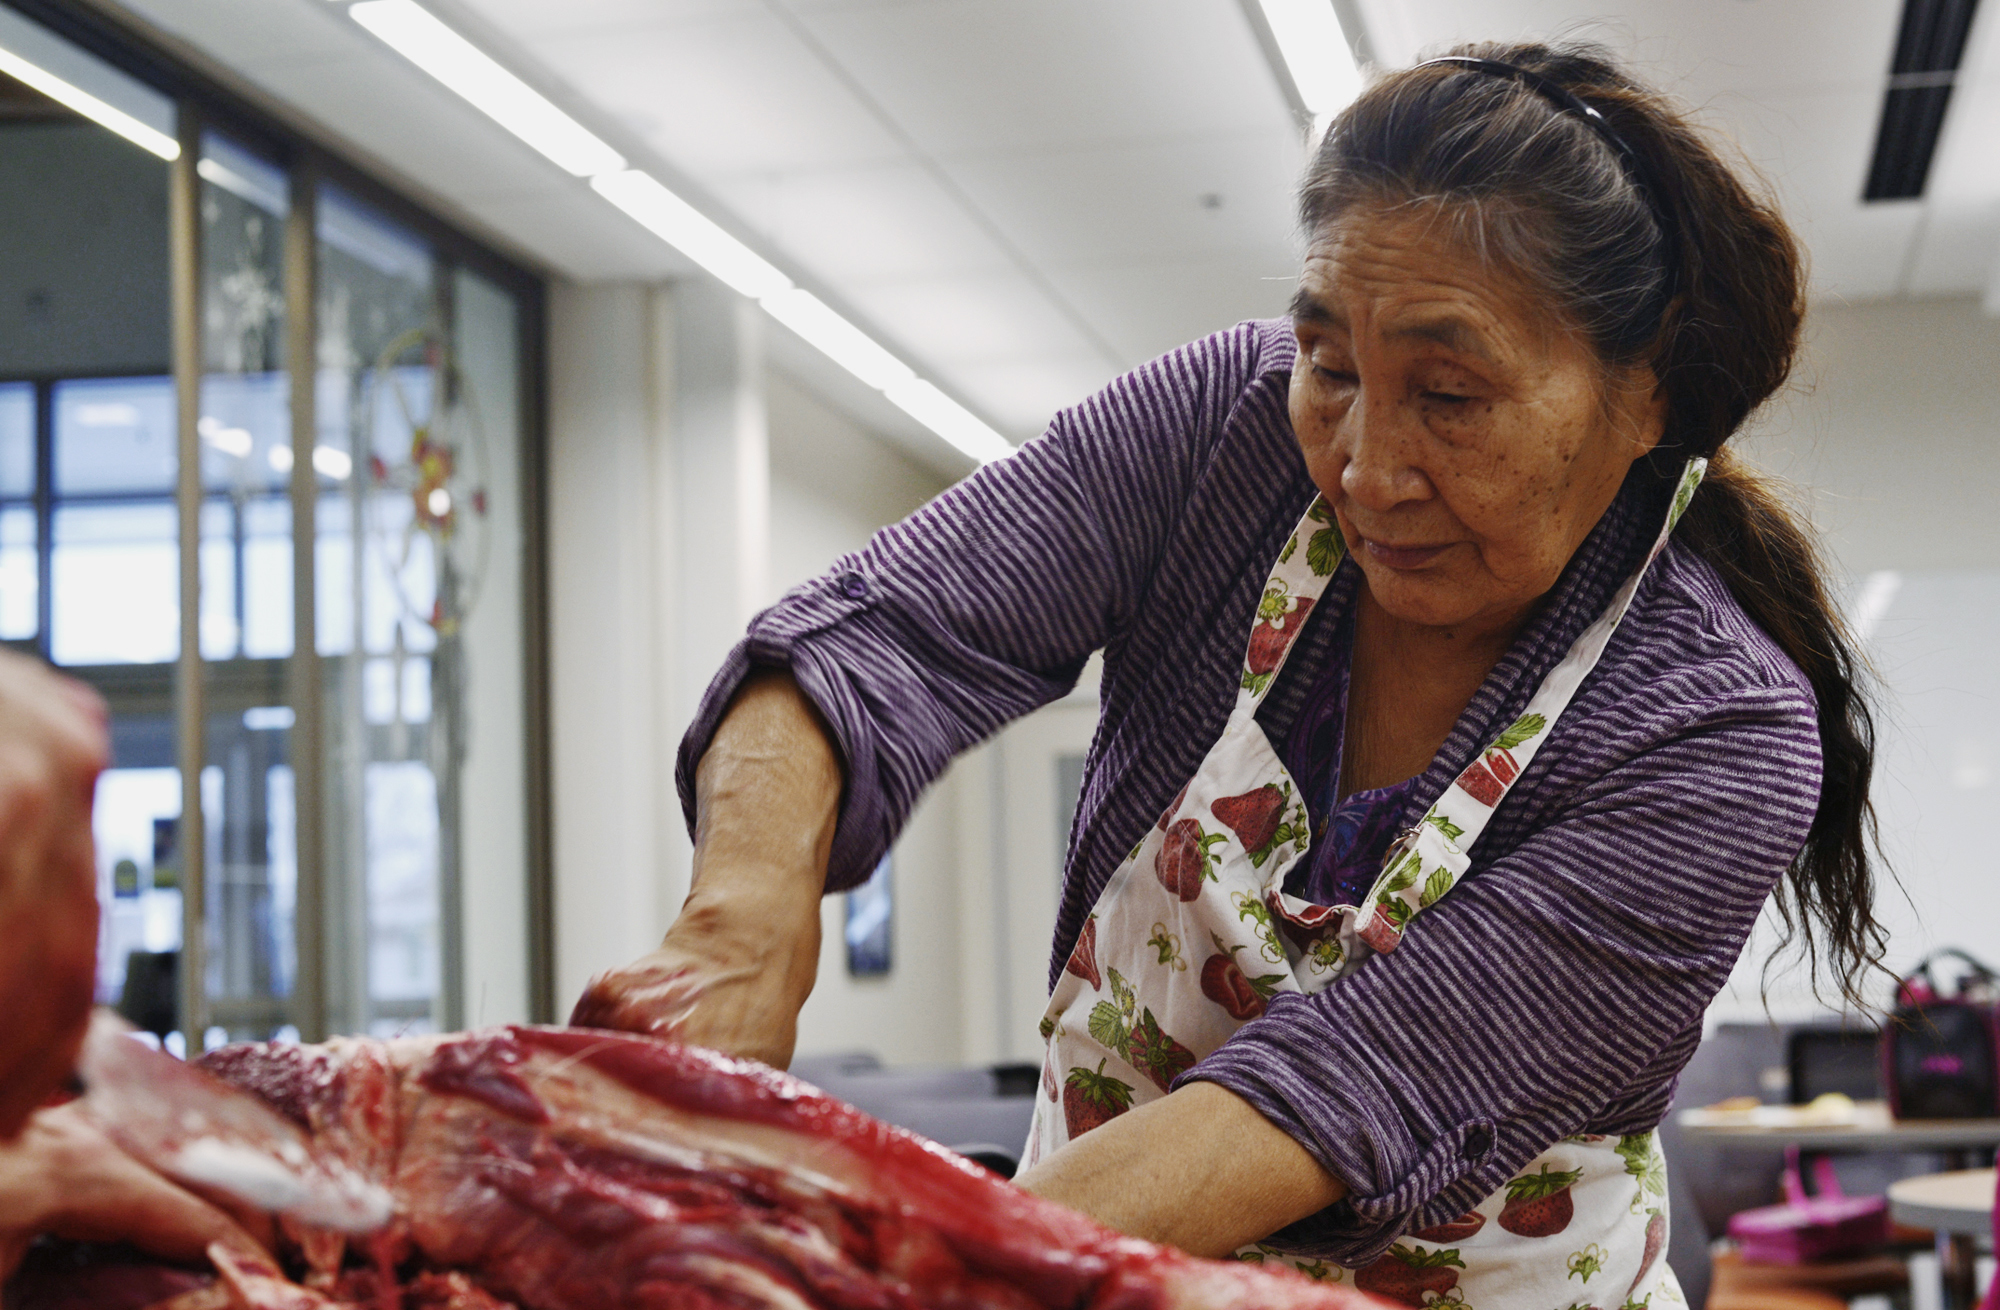 In this Jan. 27 photo, Dena’ina elder Helen Dick cuts meat from a moose head in the demonstration kitchen of the Dena’ina Wellness Center in Kenai, Alaska. Dick, who also helps teach a Dena’ina language class at Kenai Peninsula College, came to the Wellness Center to demonstrate the techniques of butchering and preparing moose head that she learned in her childhood. (Ben Boettger | Peninsula Clarion)